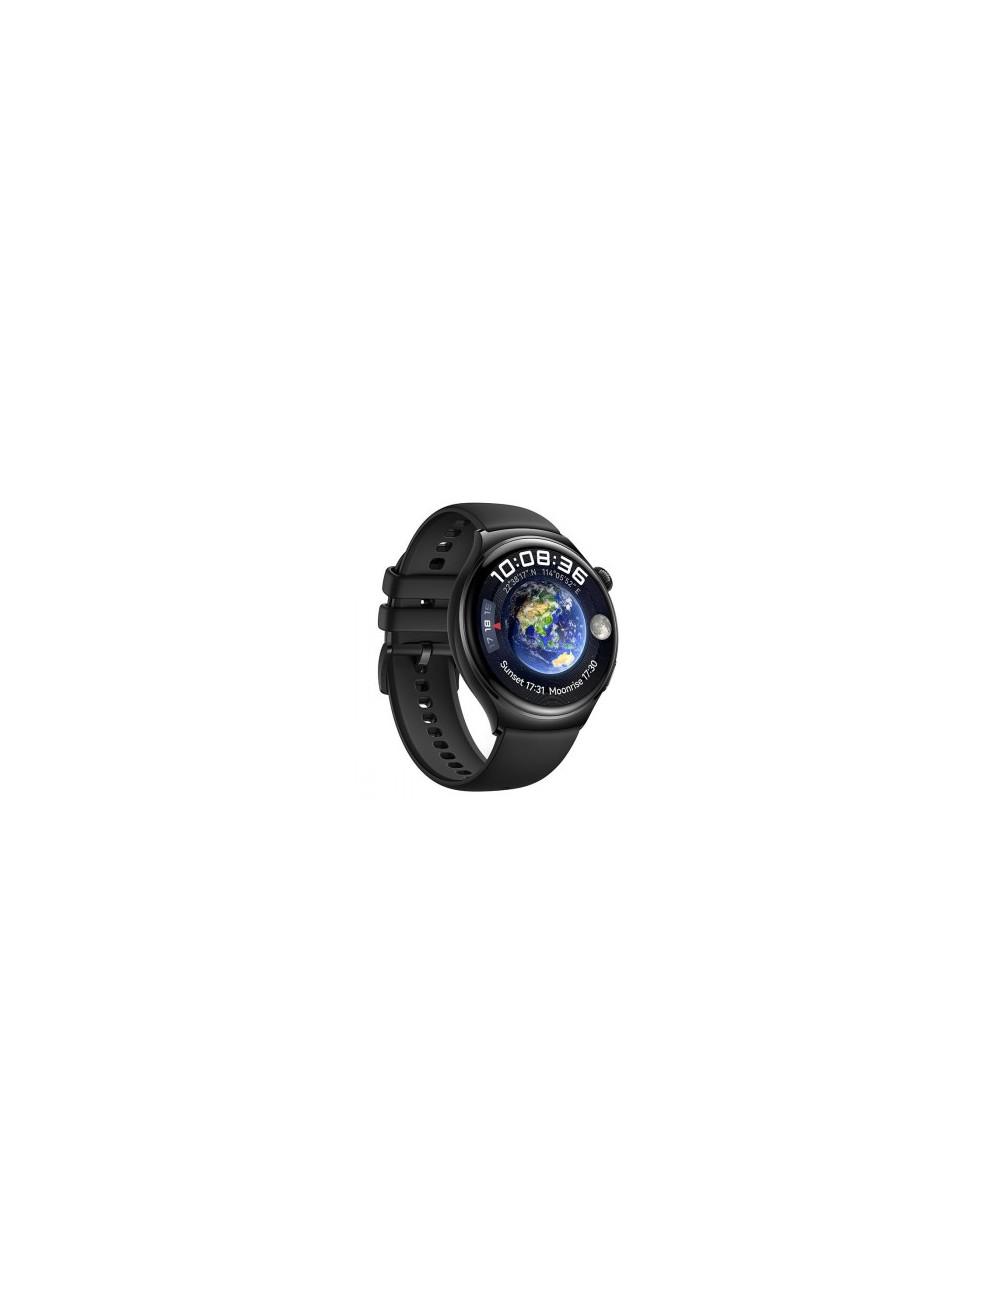 HUAWEI WATCH 4 (Black Stainless Steel Case), Archi-L19F